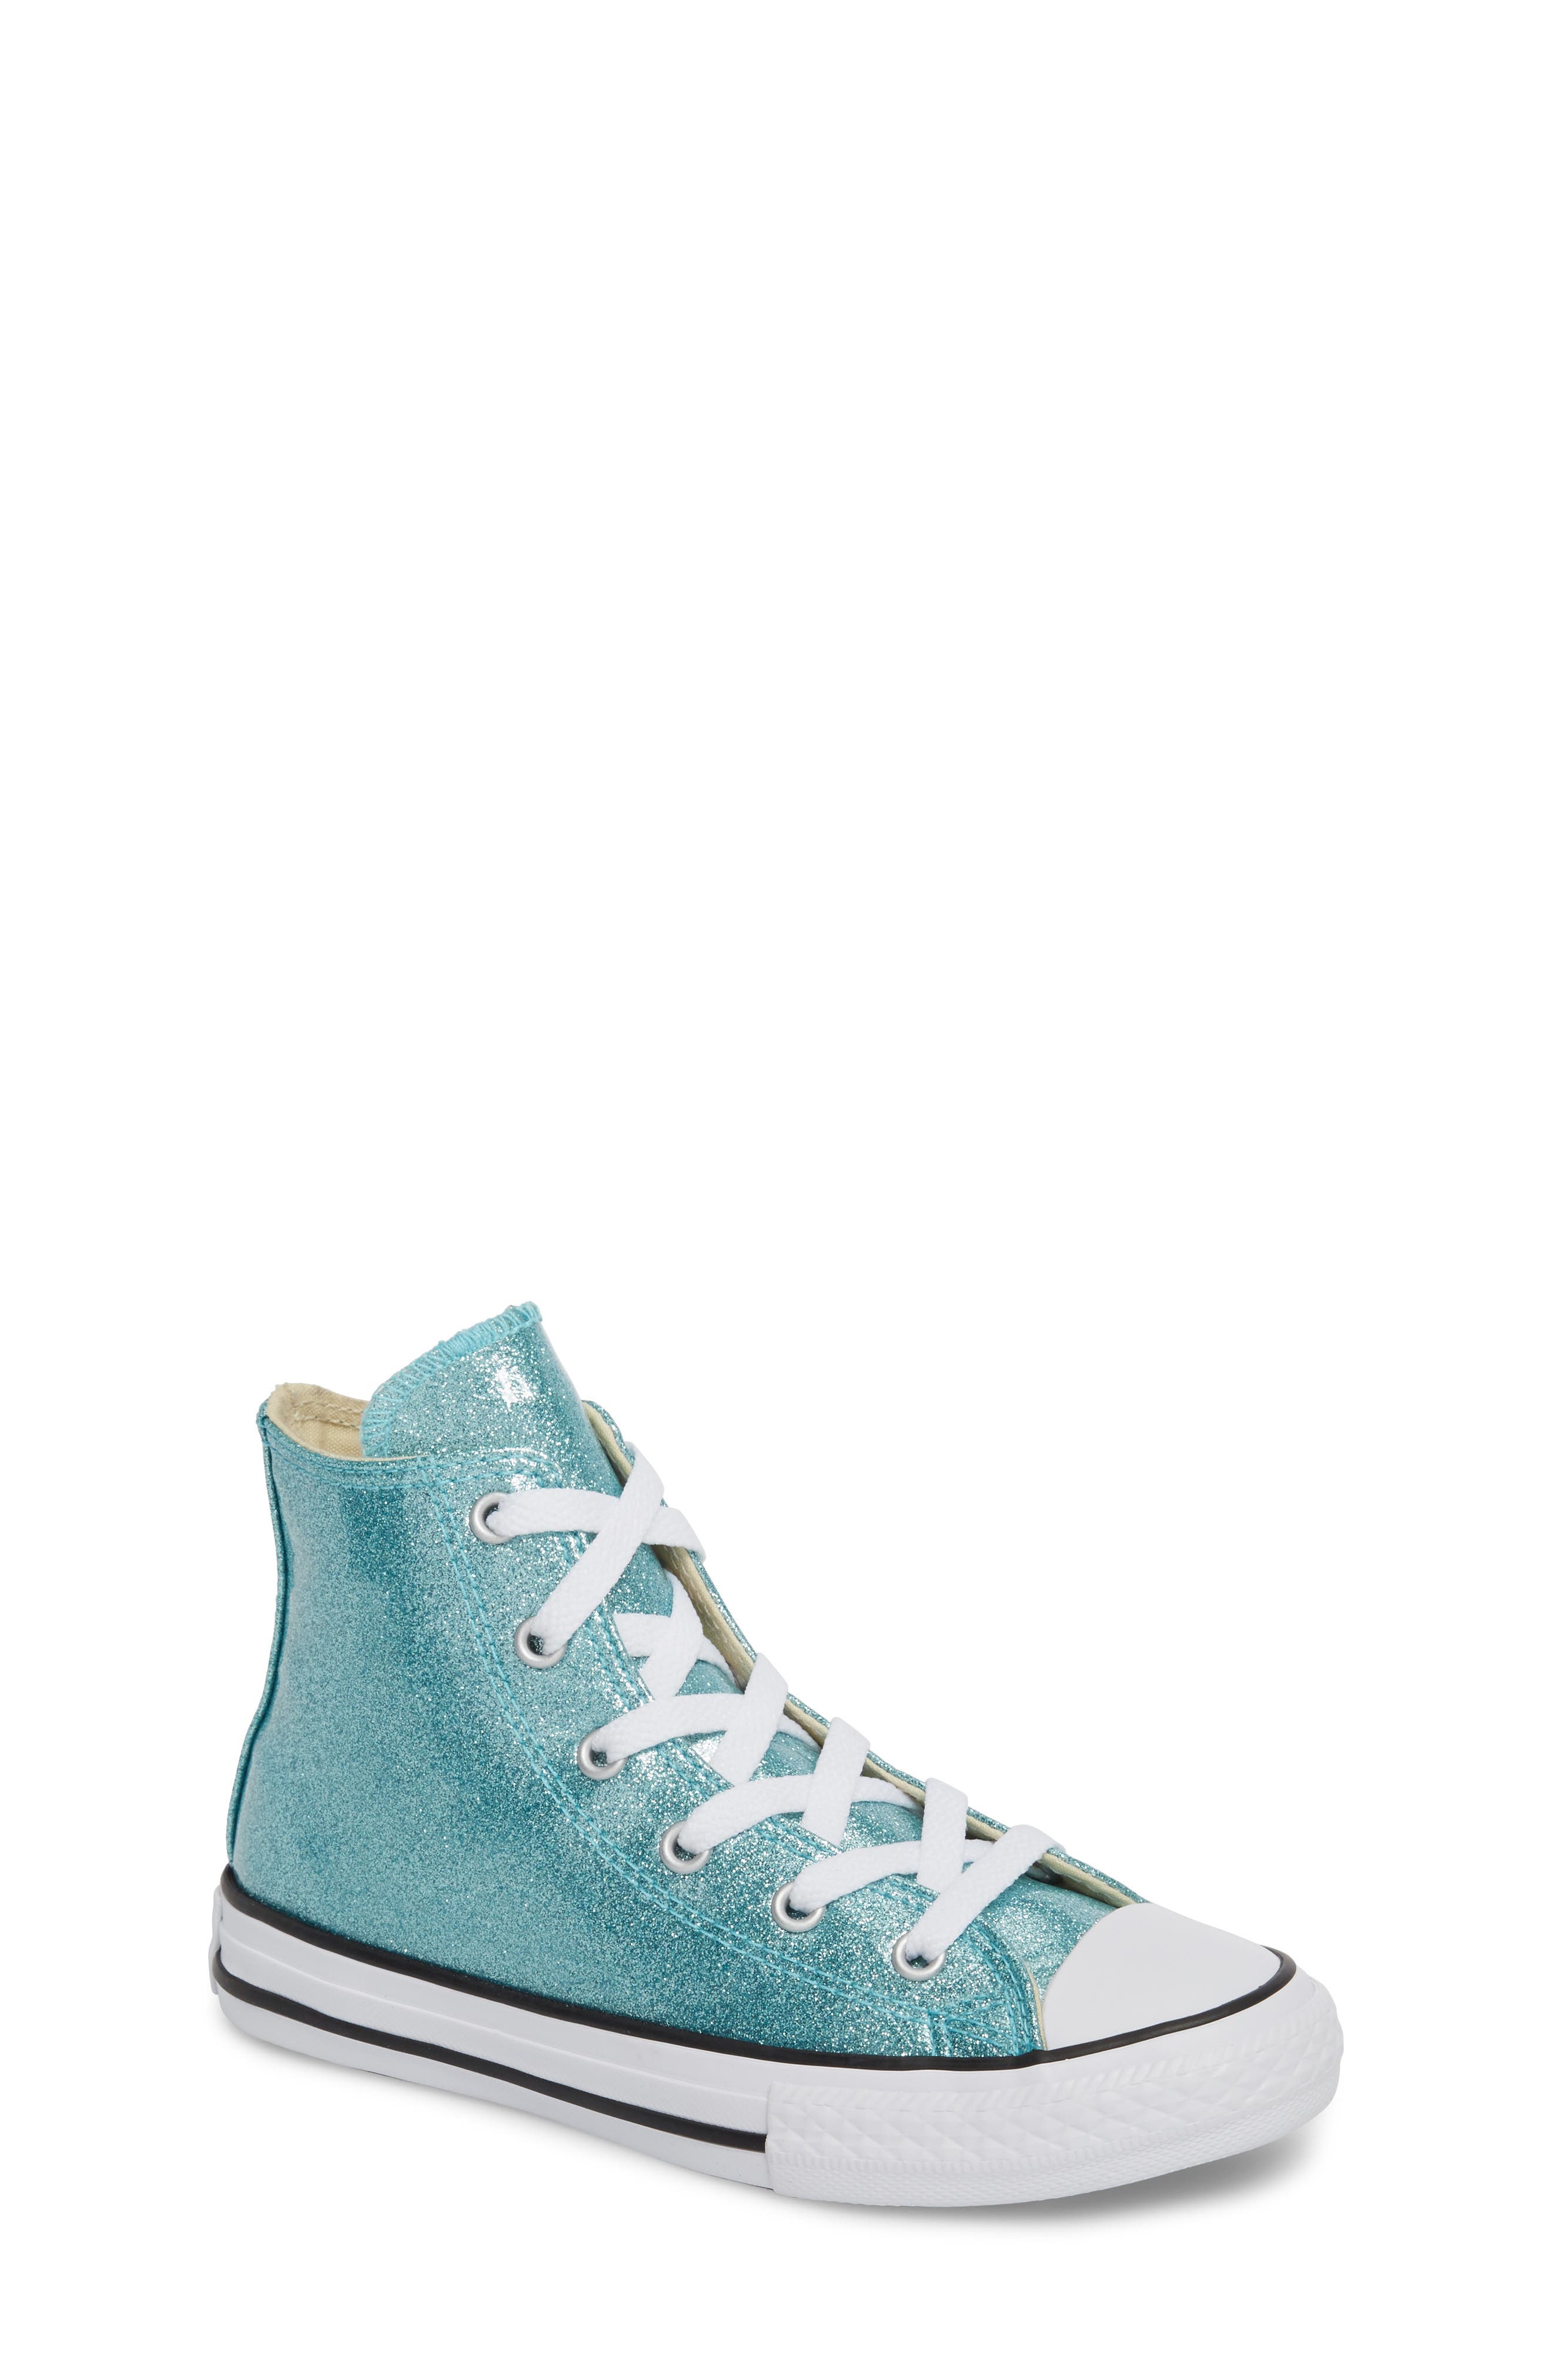 converse toddler high top sneakers